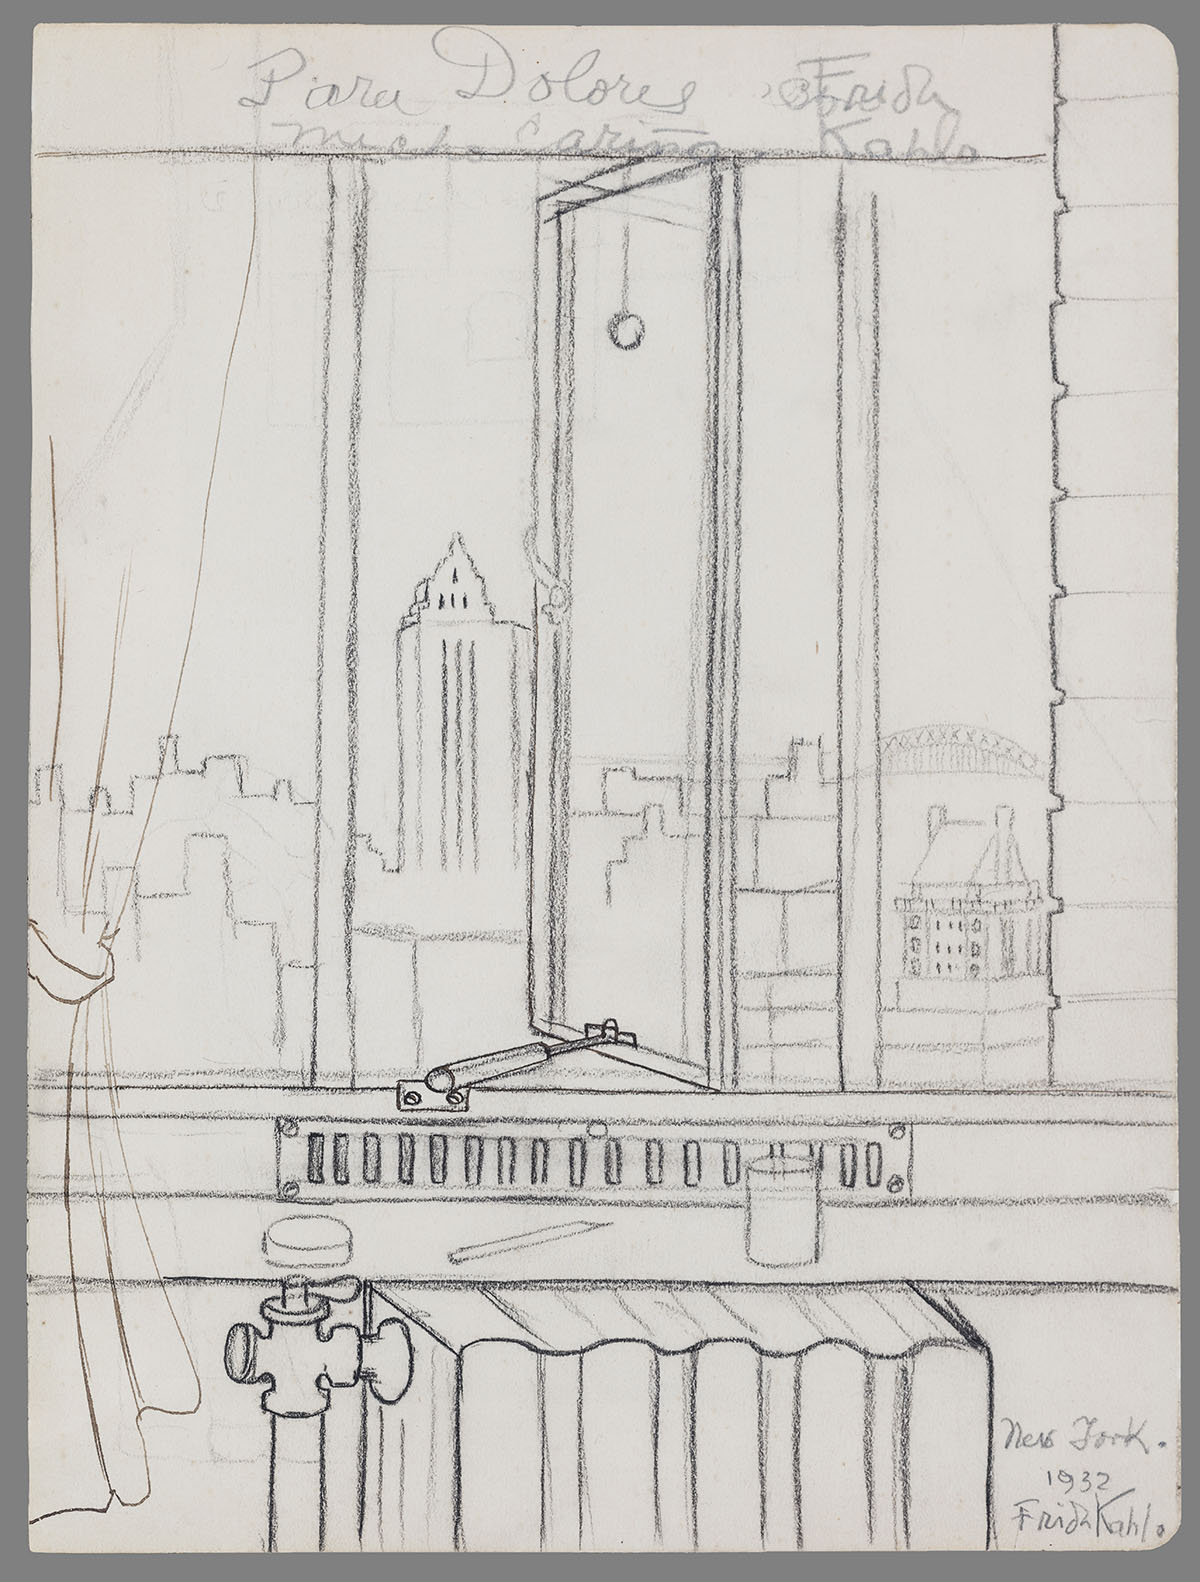 A pencil and paper drawing of New York City